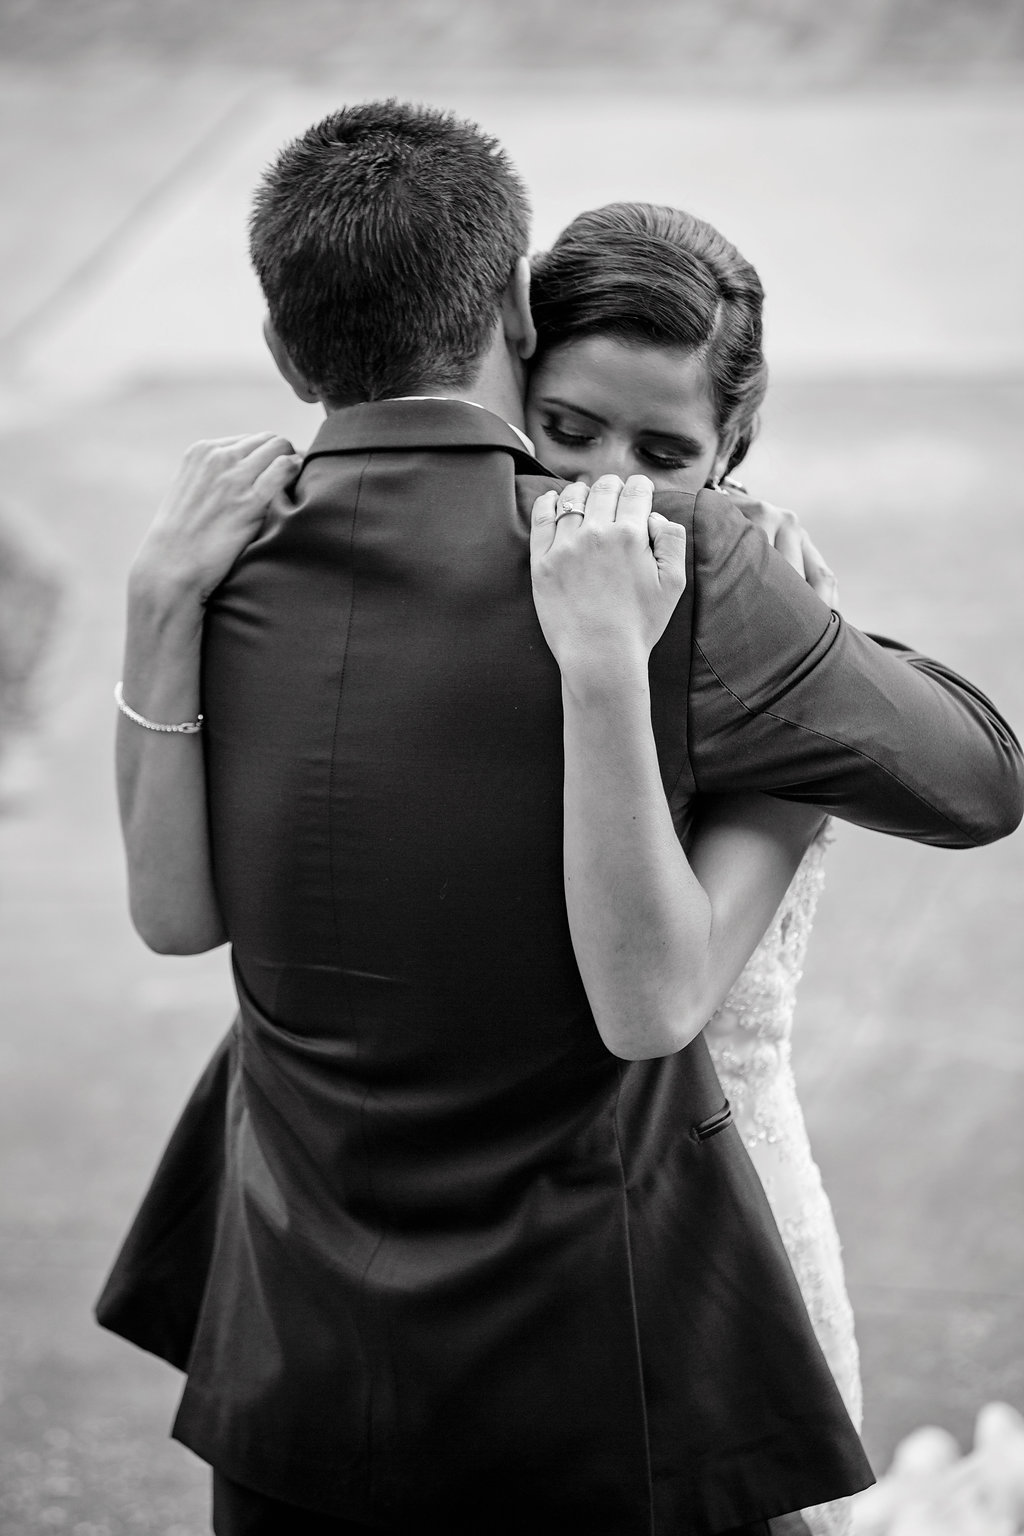 Black and White Outdoor Bride and Groom Wedding Portrait Groom Wearing Tuxedo and Bride Wearing Strappy White Lace Wedding Dress | Tampa Bay Photographer Marc Edwards Photographs